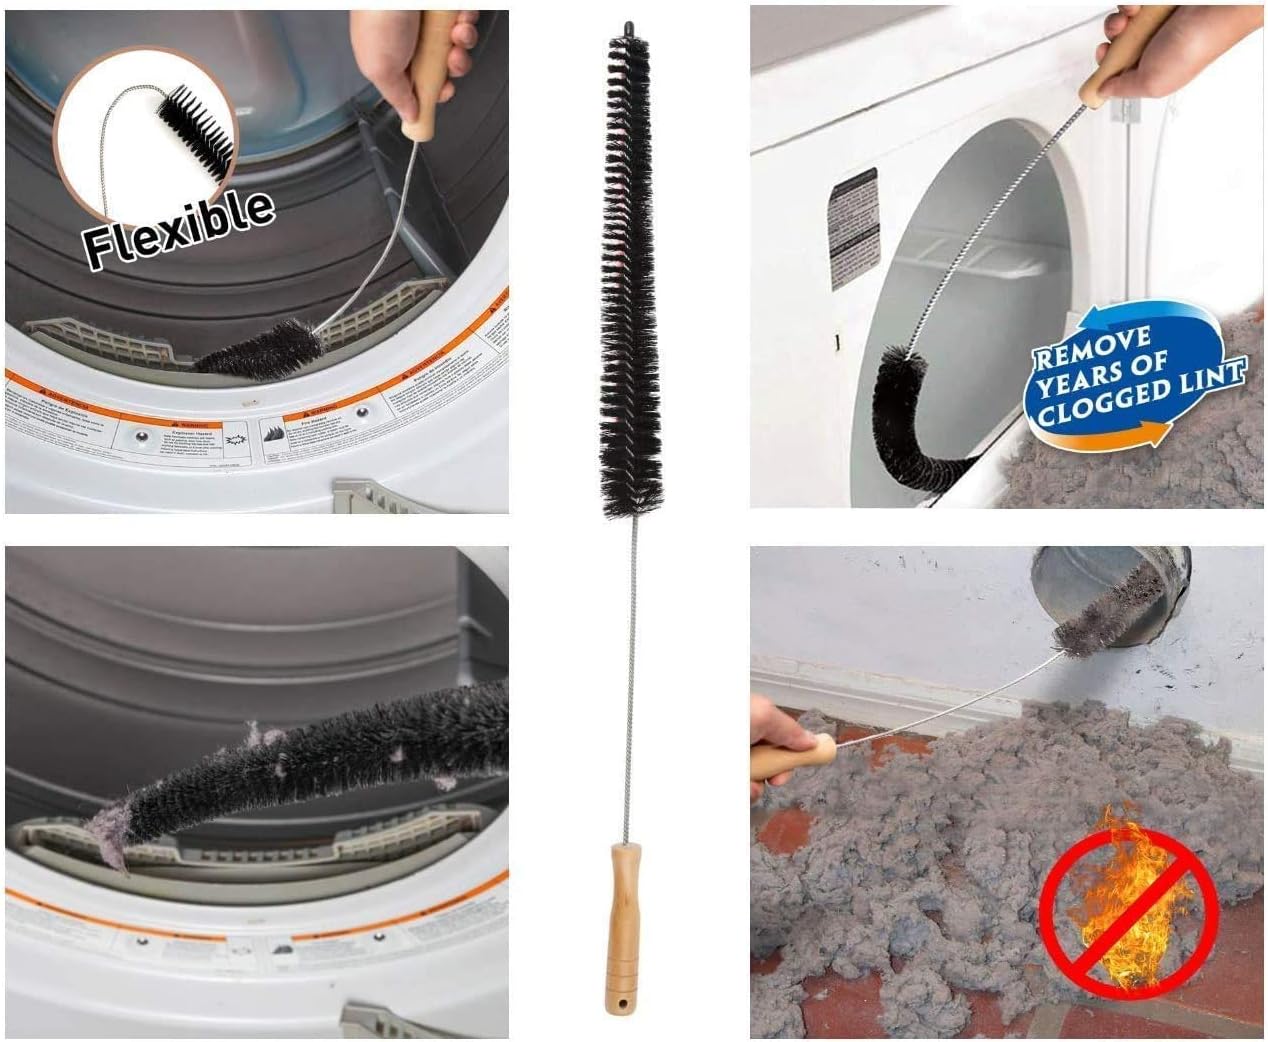 Vacuum Attachment for Dryer Vent, Crevice Cleaning Tool for Clothes Dryer  with Lint Trap Brush and Flexible Hose. Duct Cleaner Kit. Designed by Dryer